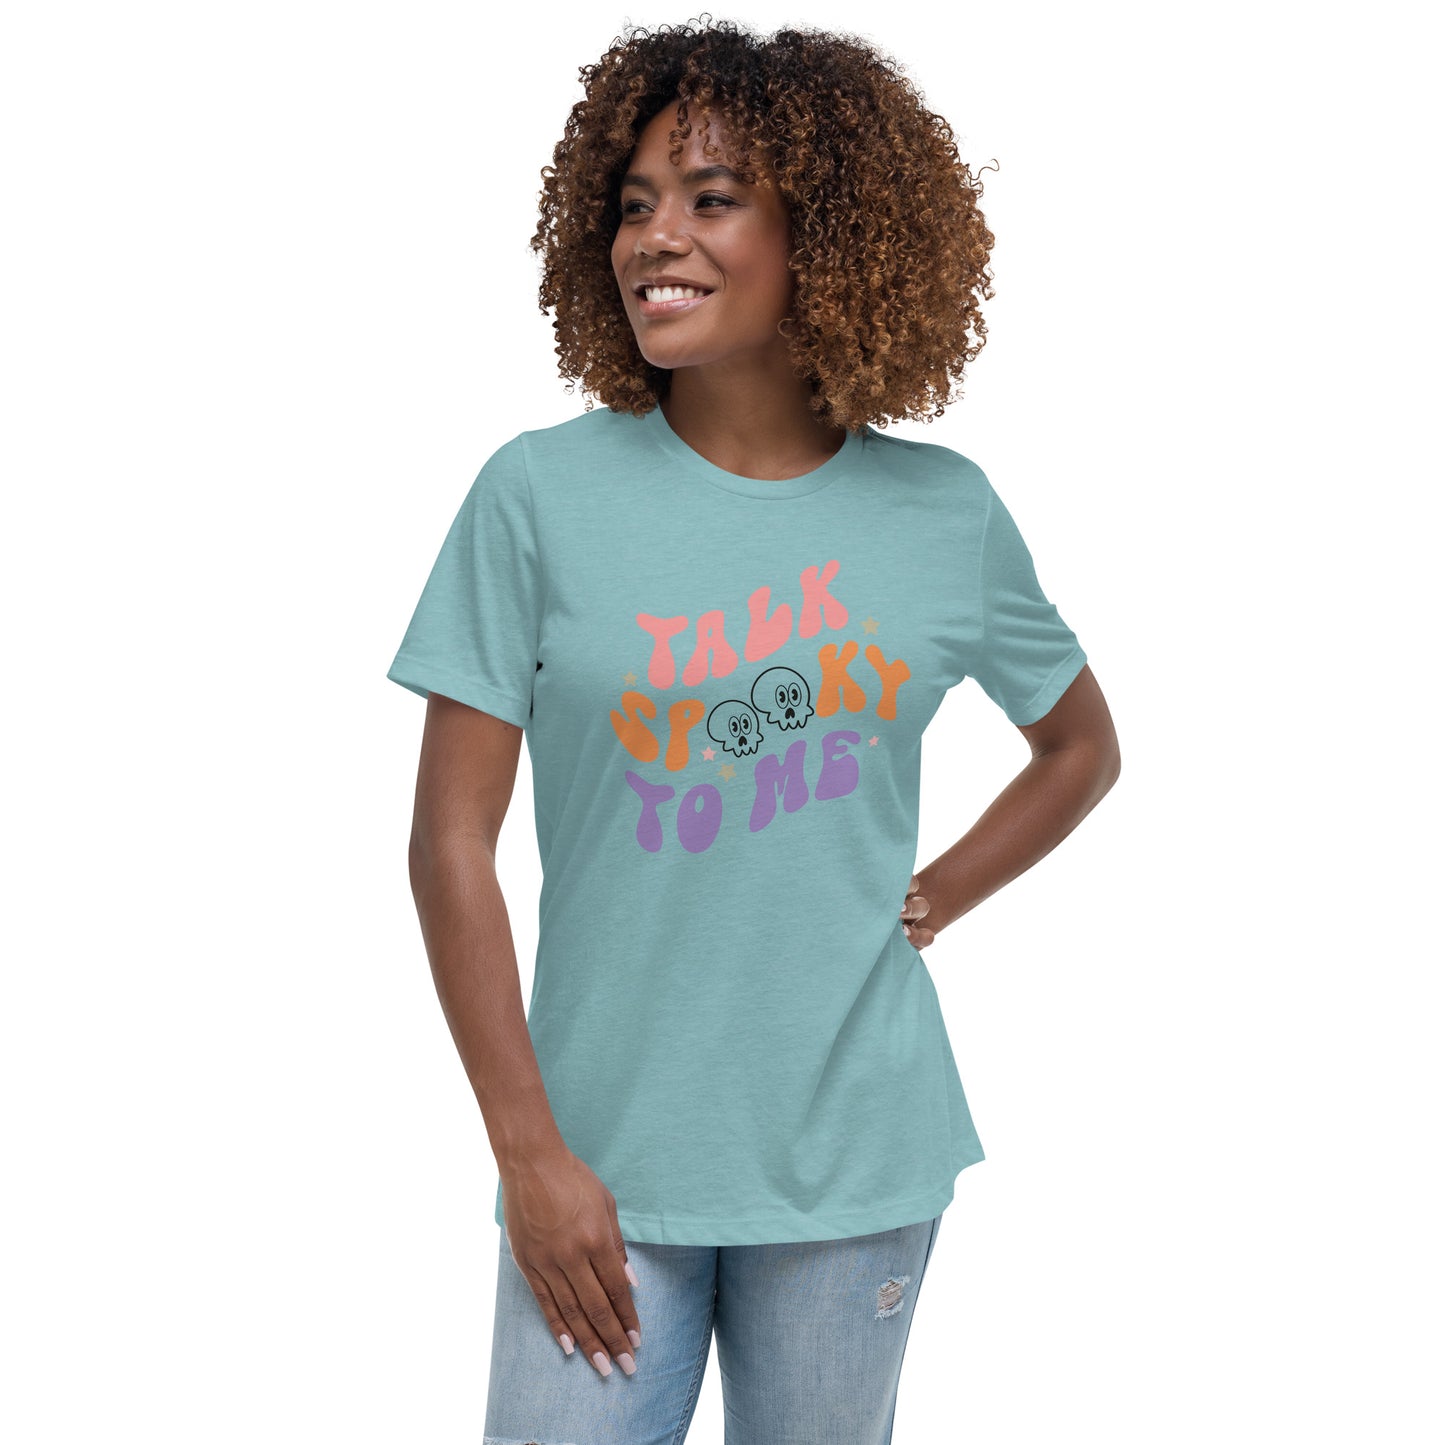 Halloween Talk Spooky to Me Women's Relaxed T-Shirt Tee Tshirt